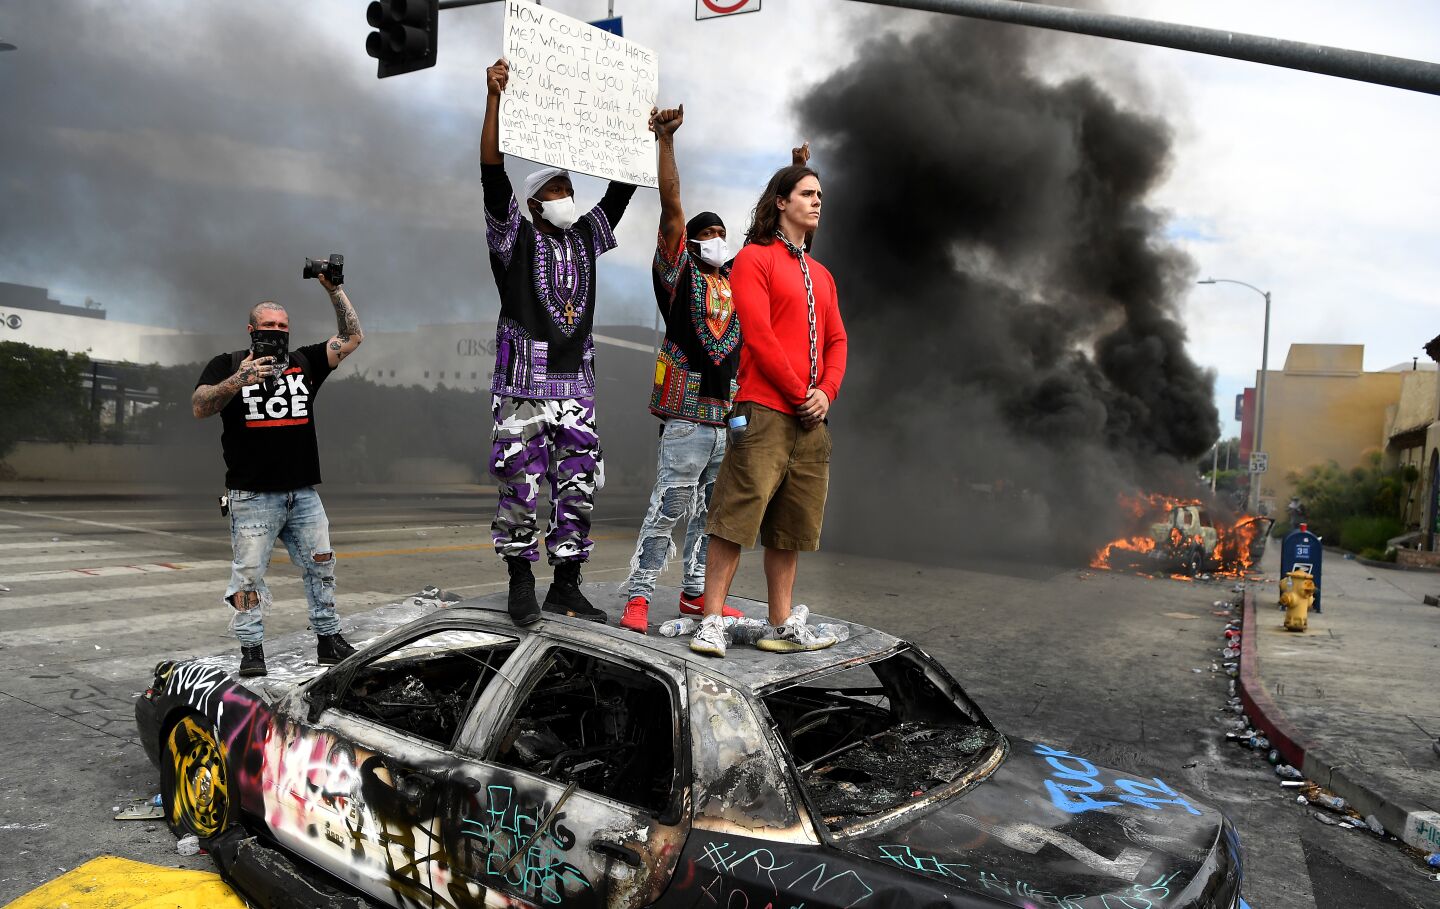 Protesters stand on top of a burned LAPD cruiser.